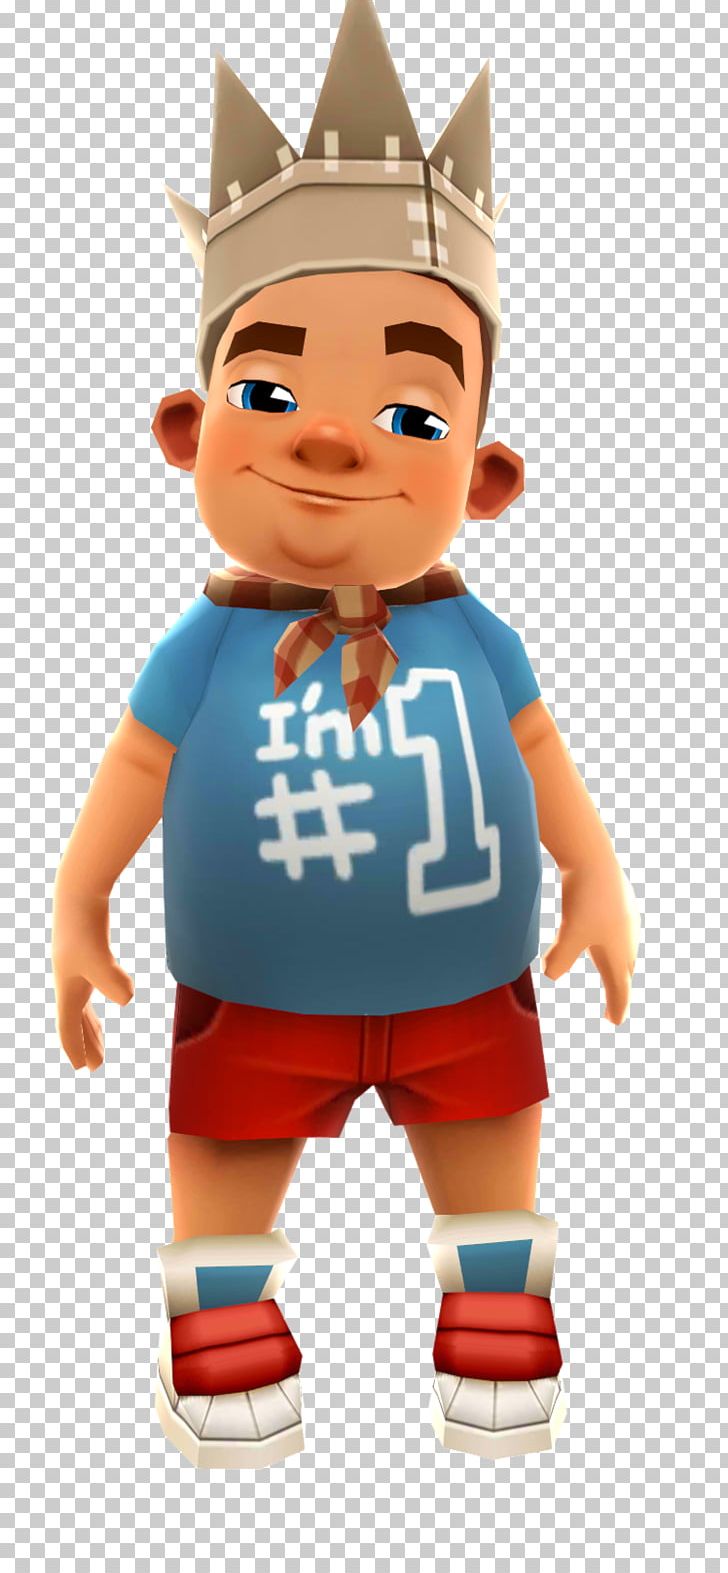 Subway Surfers Cartoon Character Figurine PNG, Clipart, Boombox, Boy, Cartoon, Character, Fiction Free PNG Download